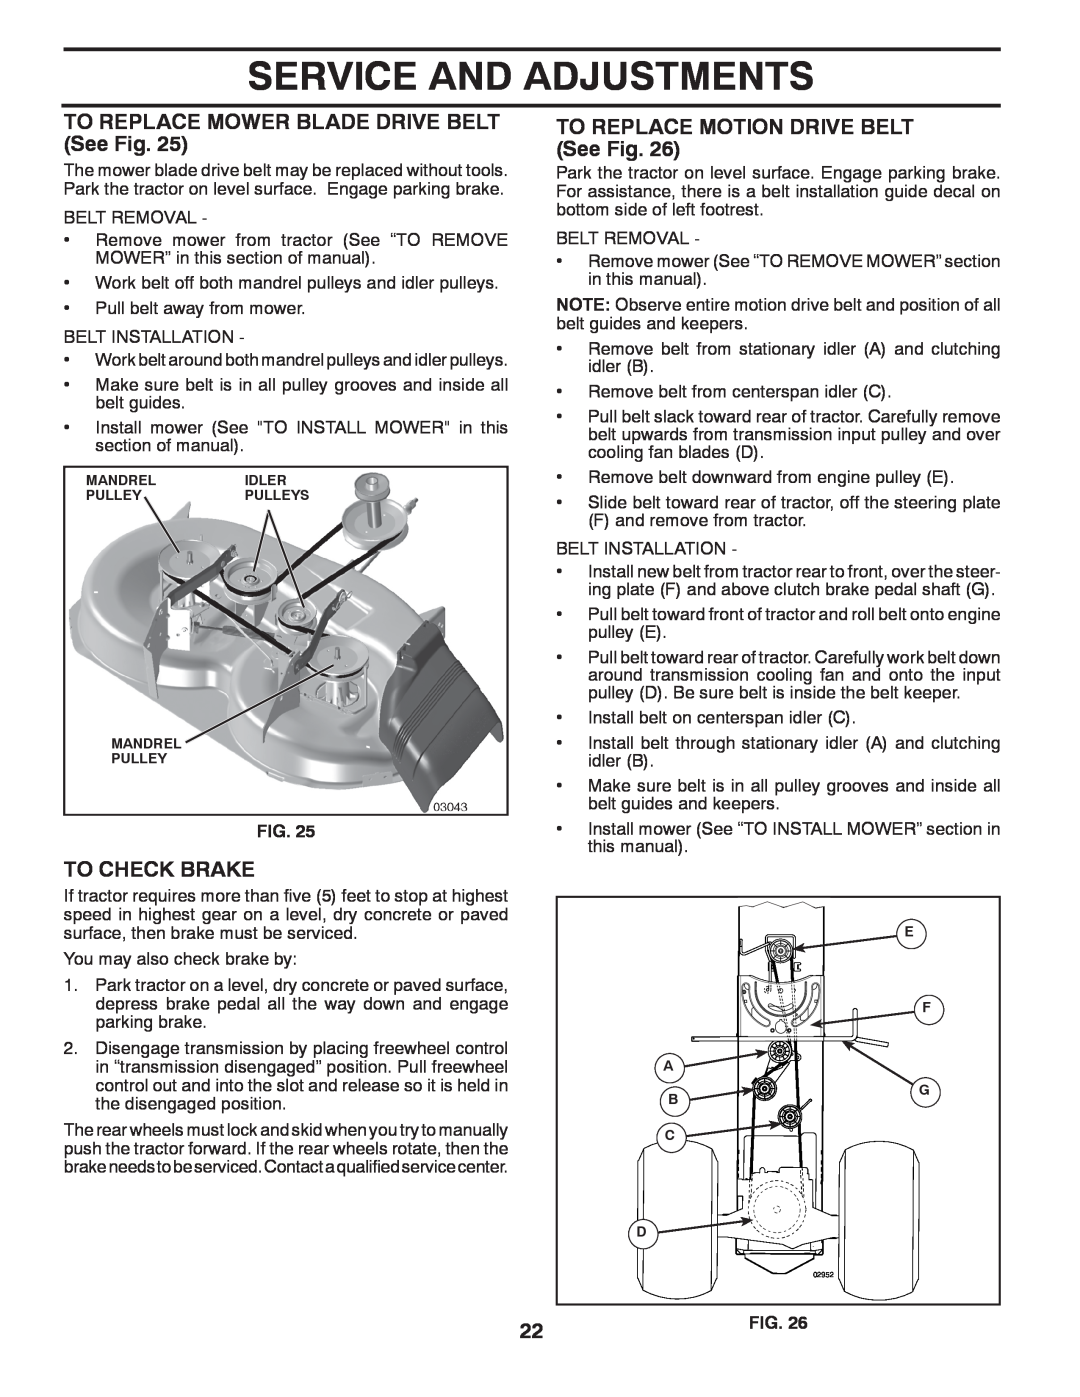 Poulan 411287 manual TO REPLACE MOWER BLADE DRIVE BELT See Fig, To Check Brake, TO REPLACE MOTION DRIVE BELT See Fig 